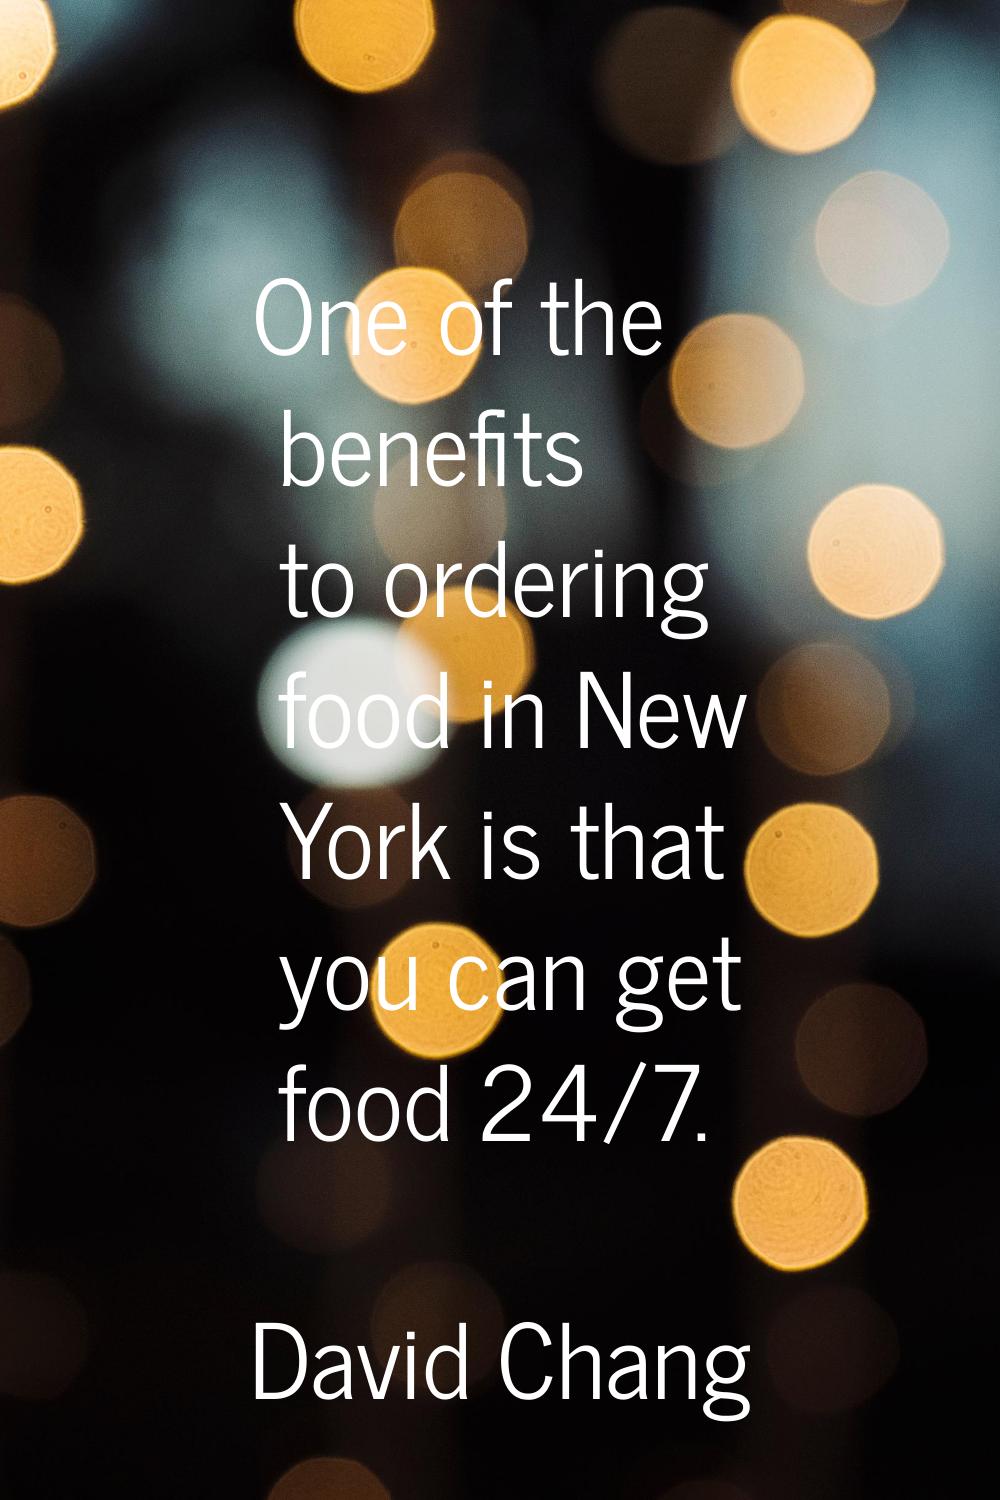 One of the benefits to ordering food in New York is that you can get food 24/7.